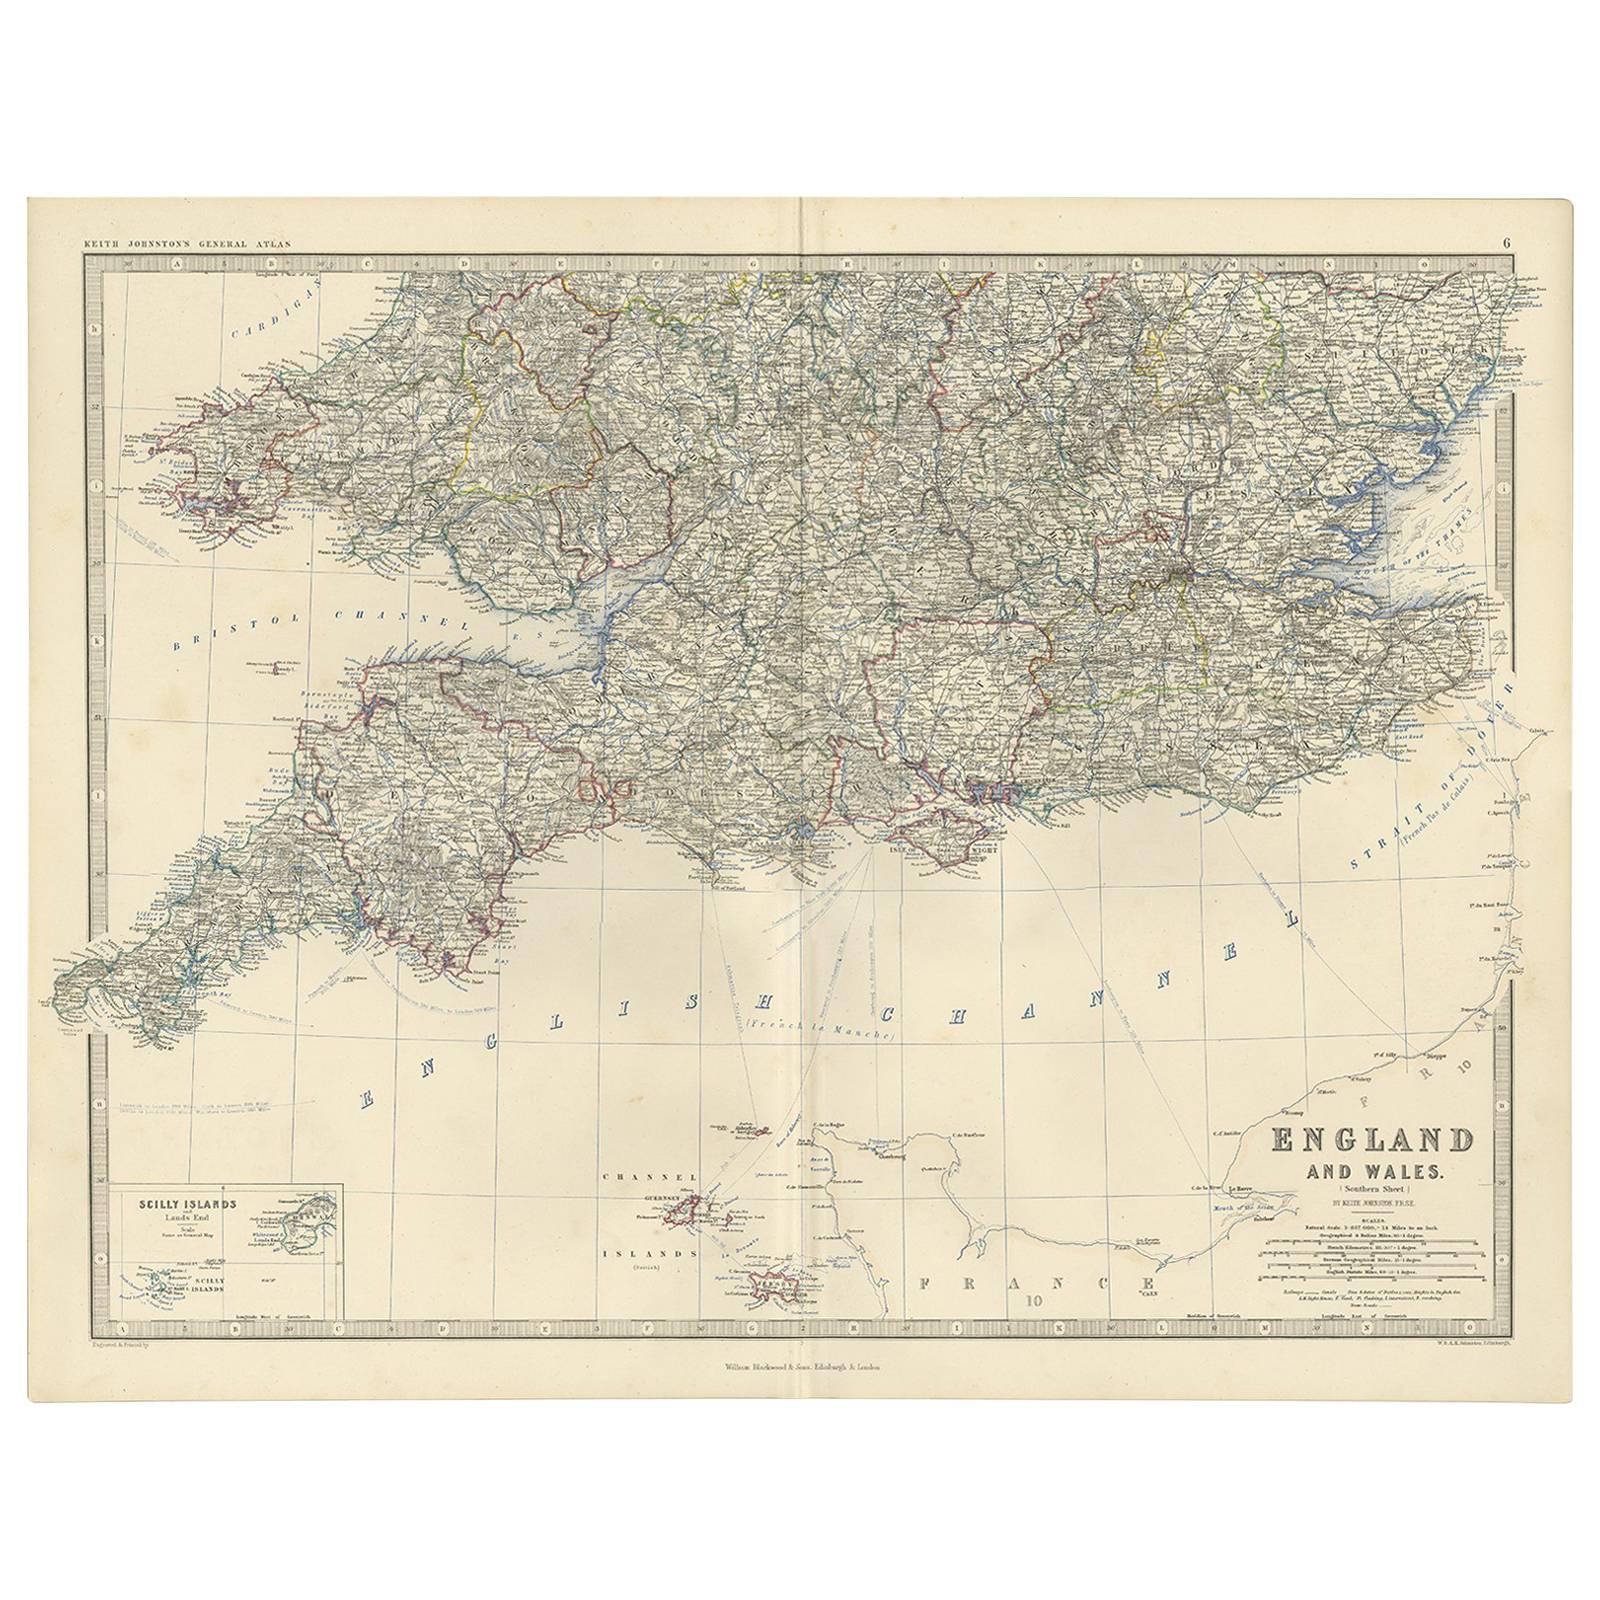 Antique Map of England and Wales by A.K. Johnston, 1865